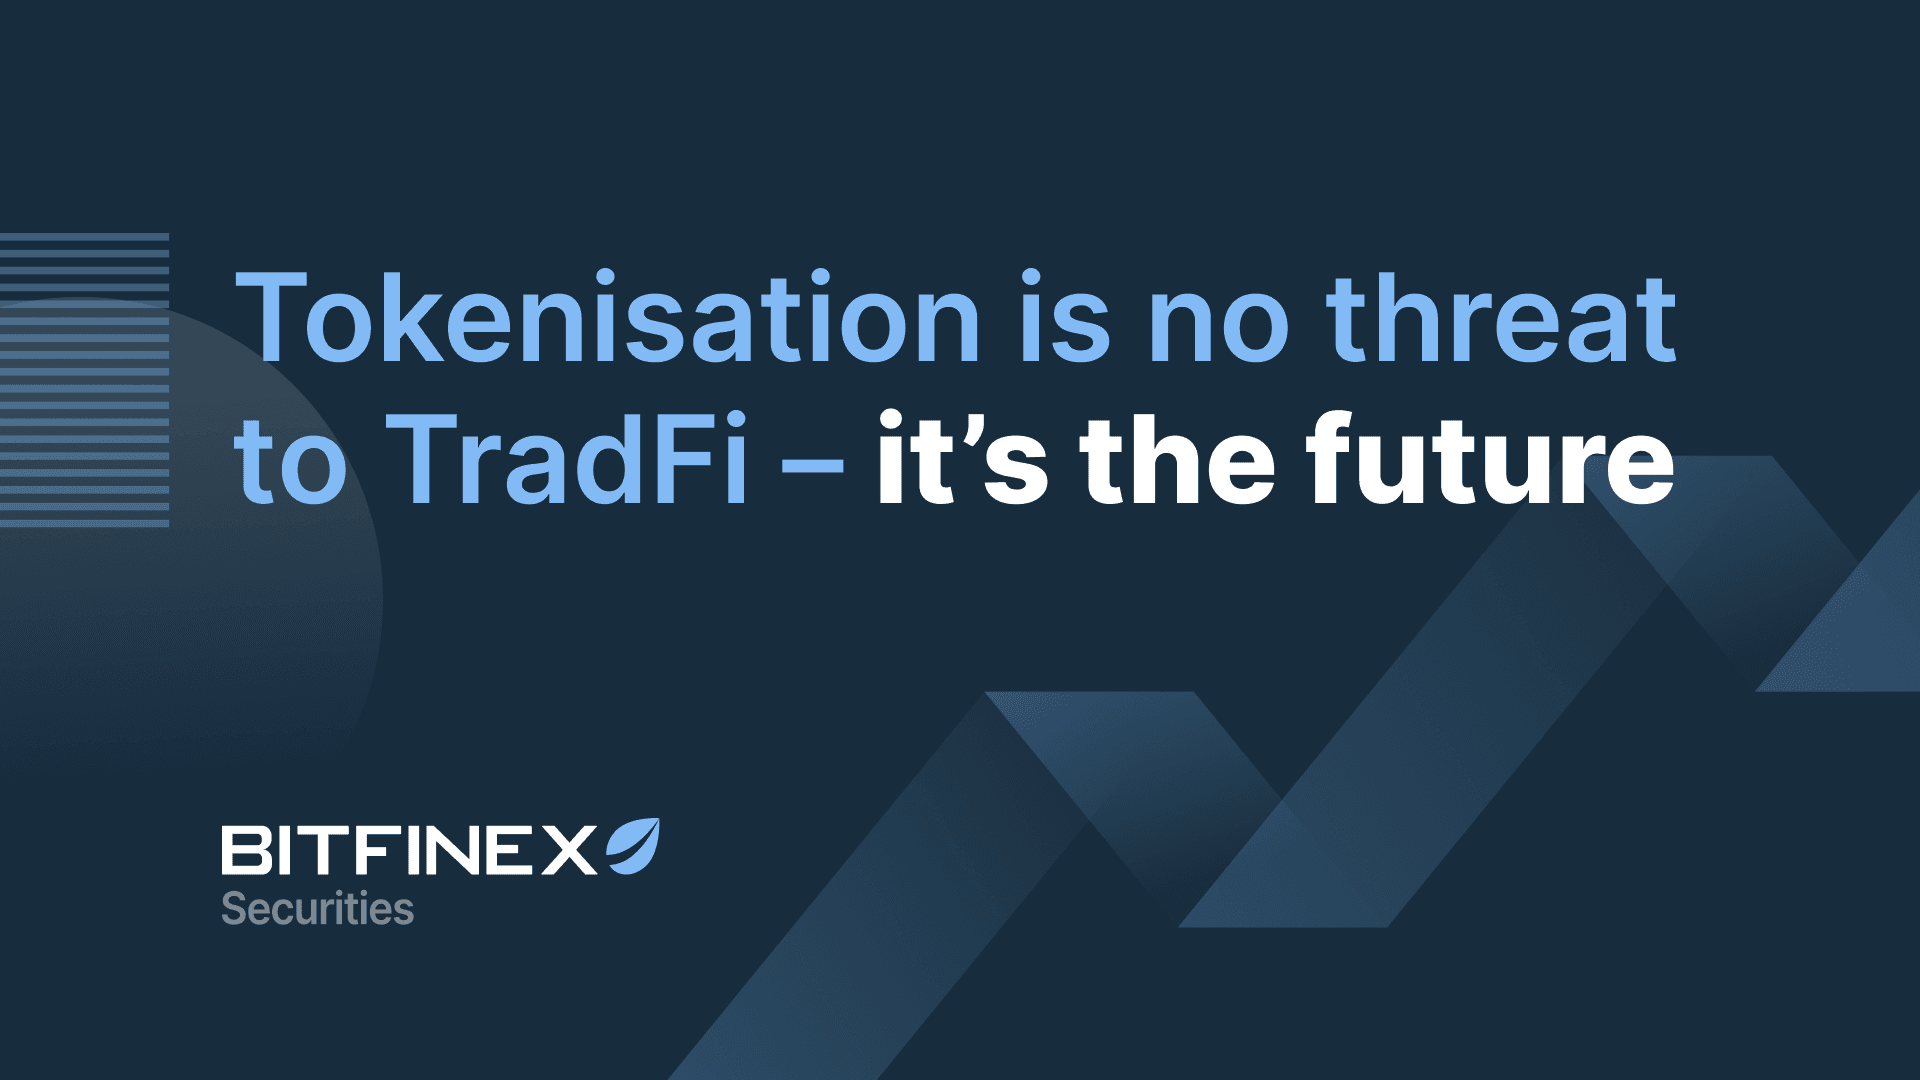 Tokenisation is no threat to TradFi – it’s the future